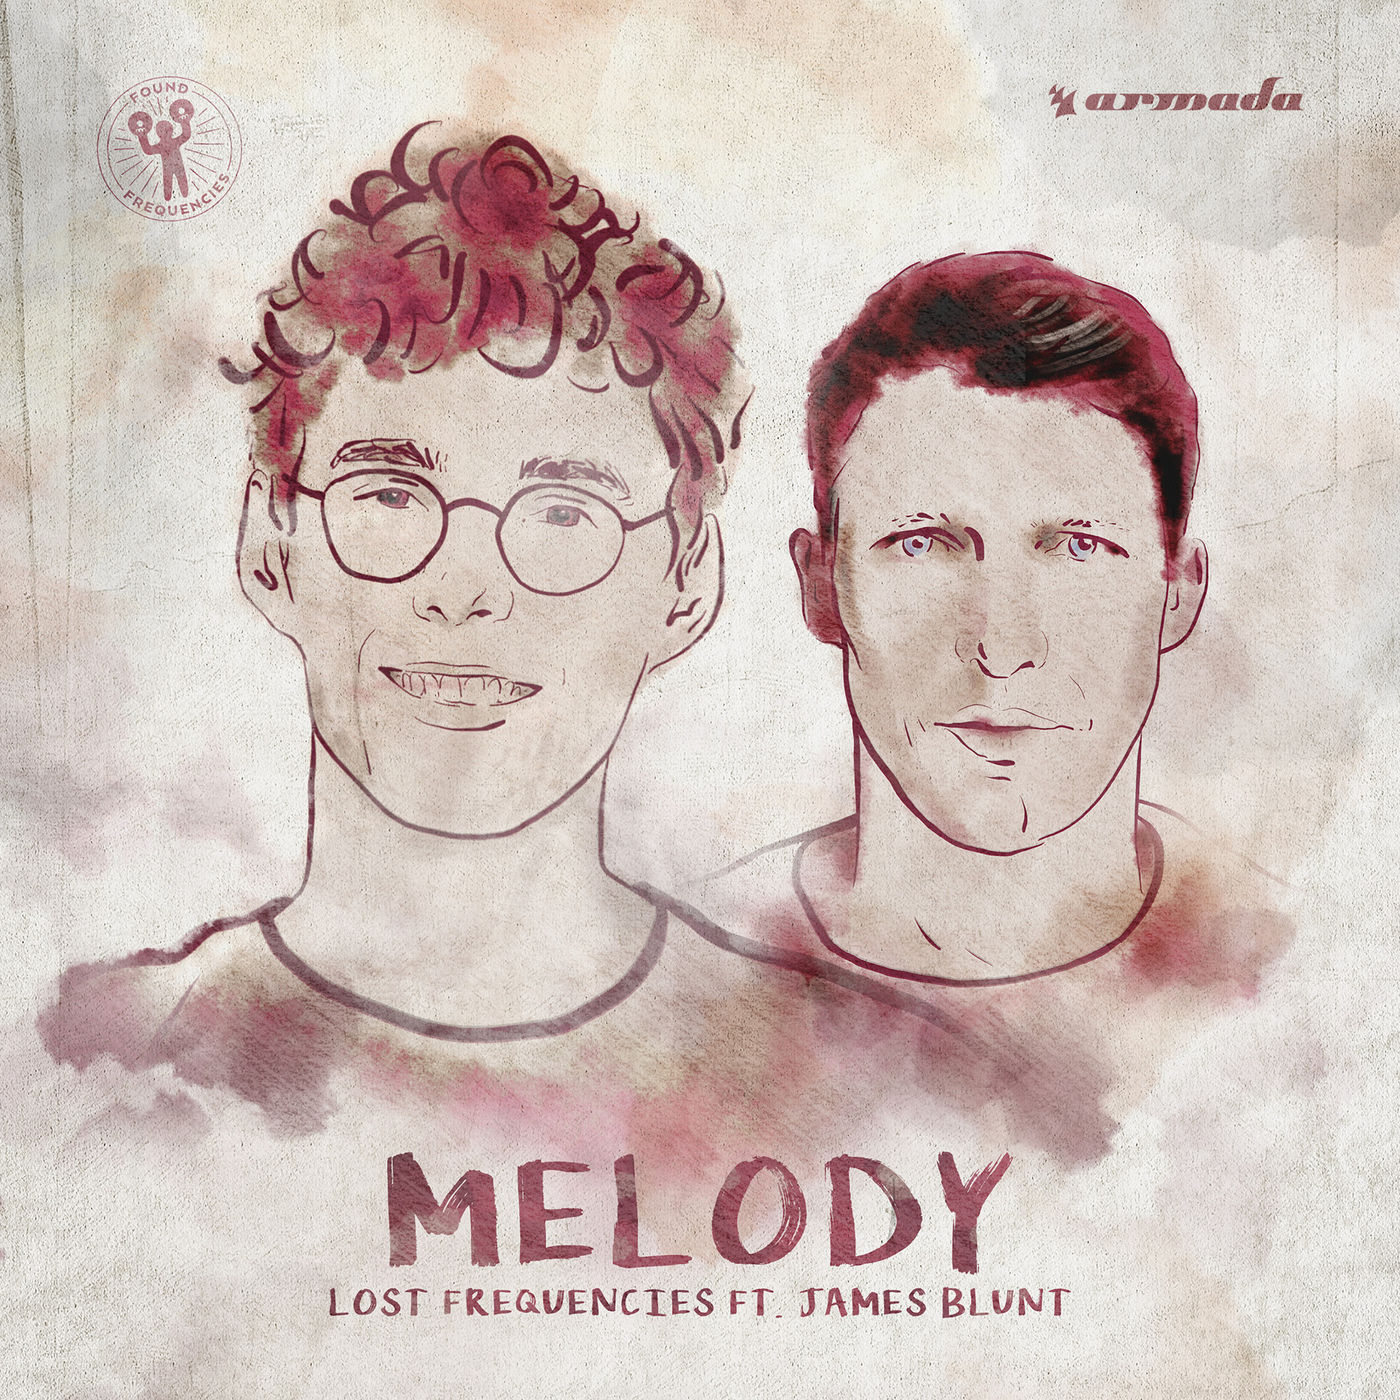 Lost Frequencies ft. James Blunt - Melody [Melodic House]